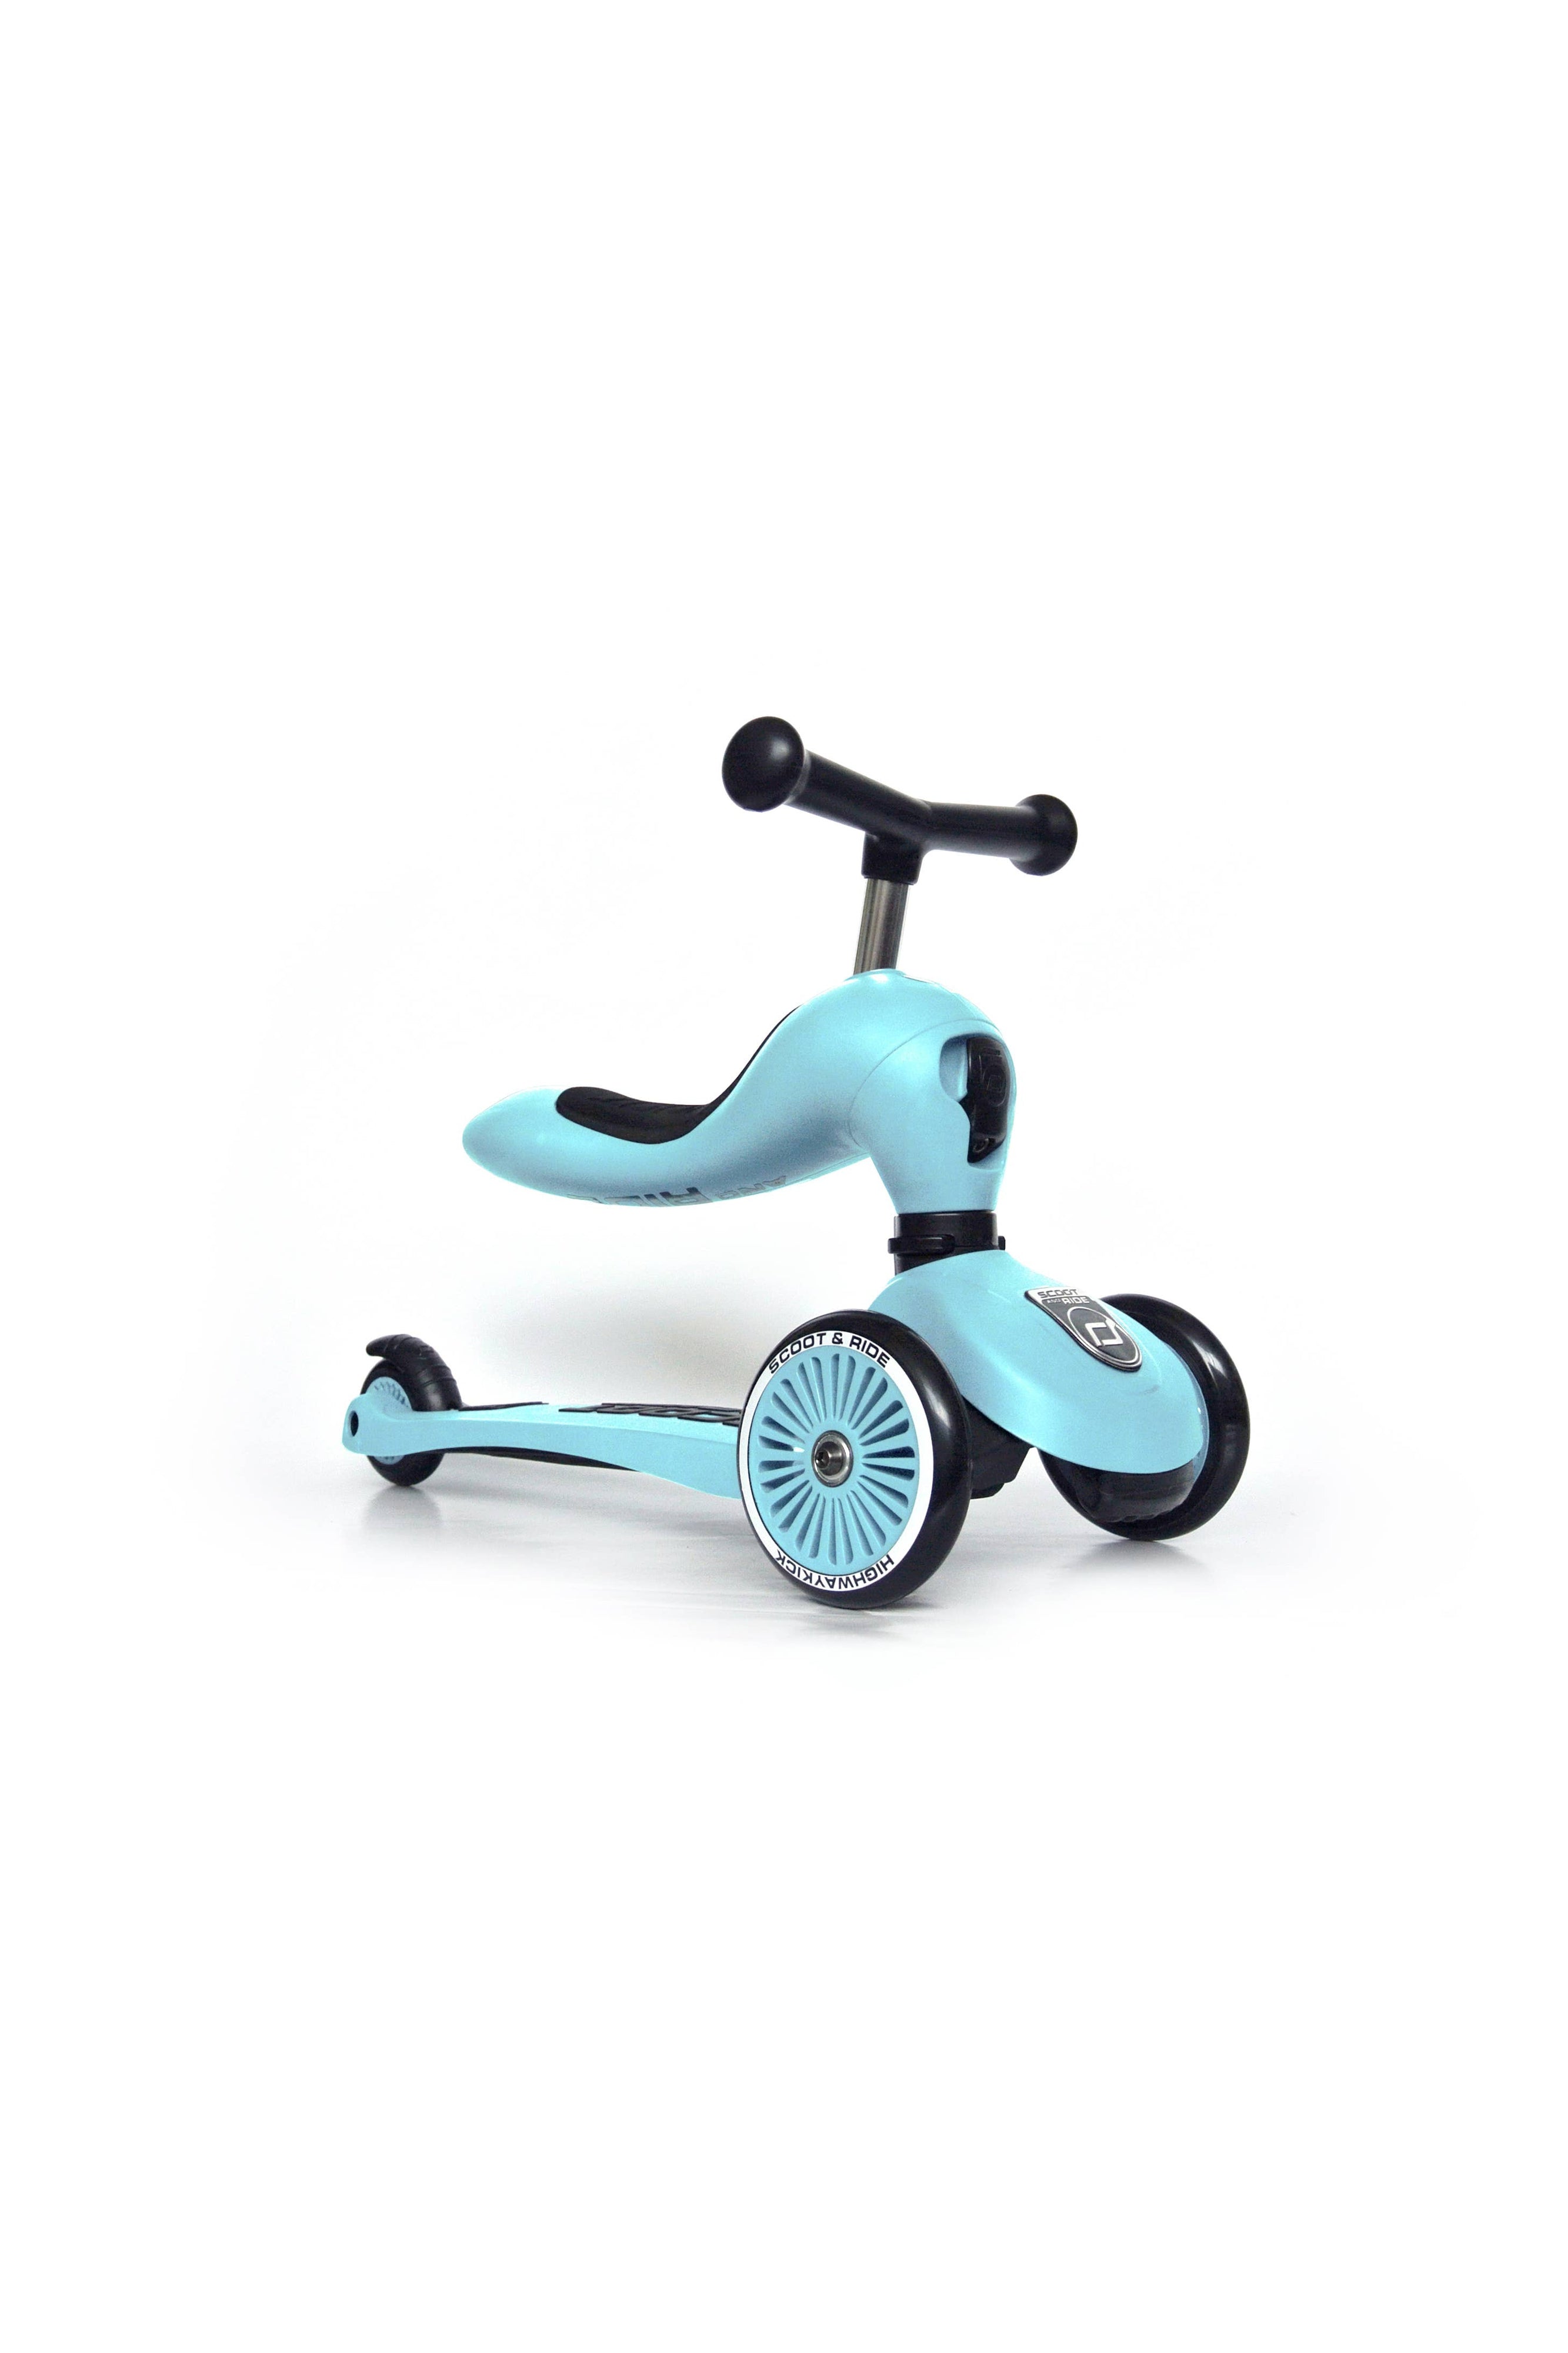  Scoot and Ride Highwaykick 1 Scooter and Ride On Toy Black and  Golden Lifestyle (Limited Edition) : Toys & Games